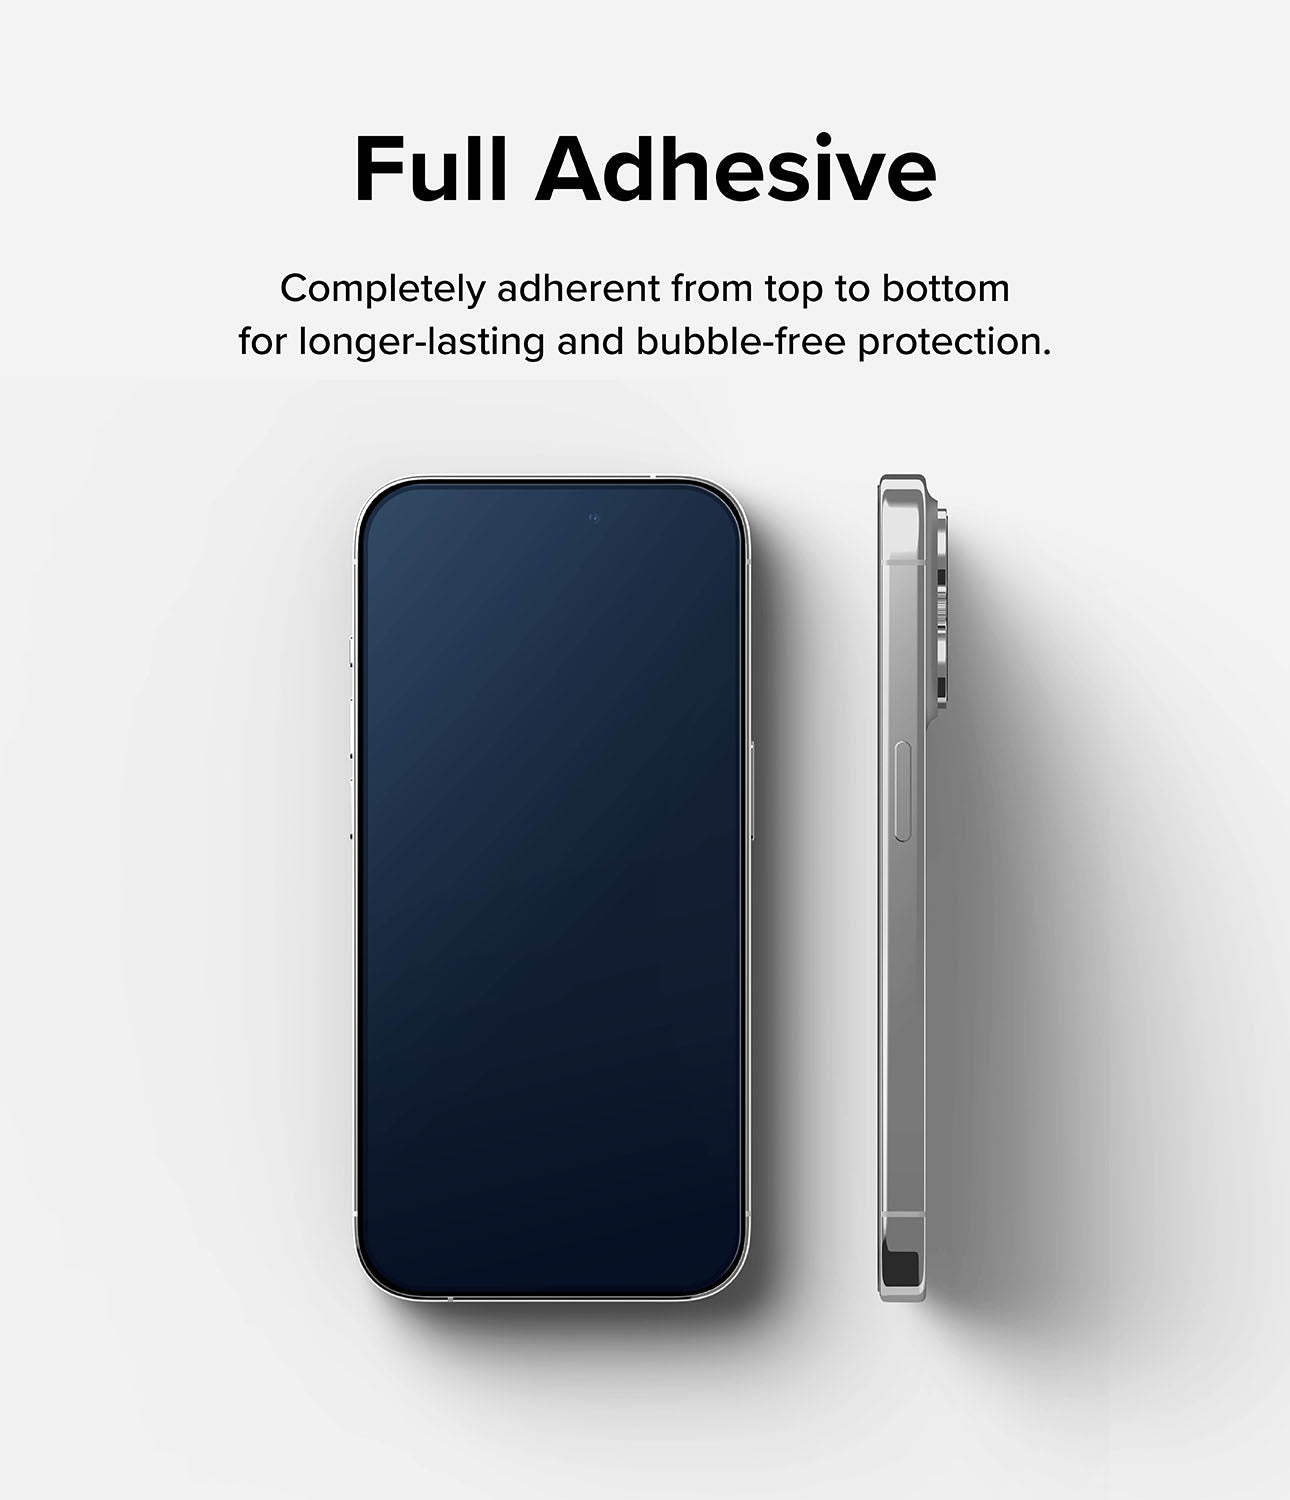 iPhone 15 Pro Max Screen Protector | Full Cover Glass - Full Adhesive. Completely adherent from top to bottom for longer-lasting and bubble-free protection.